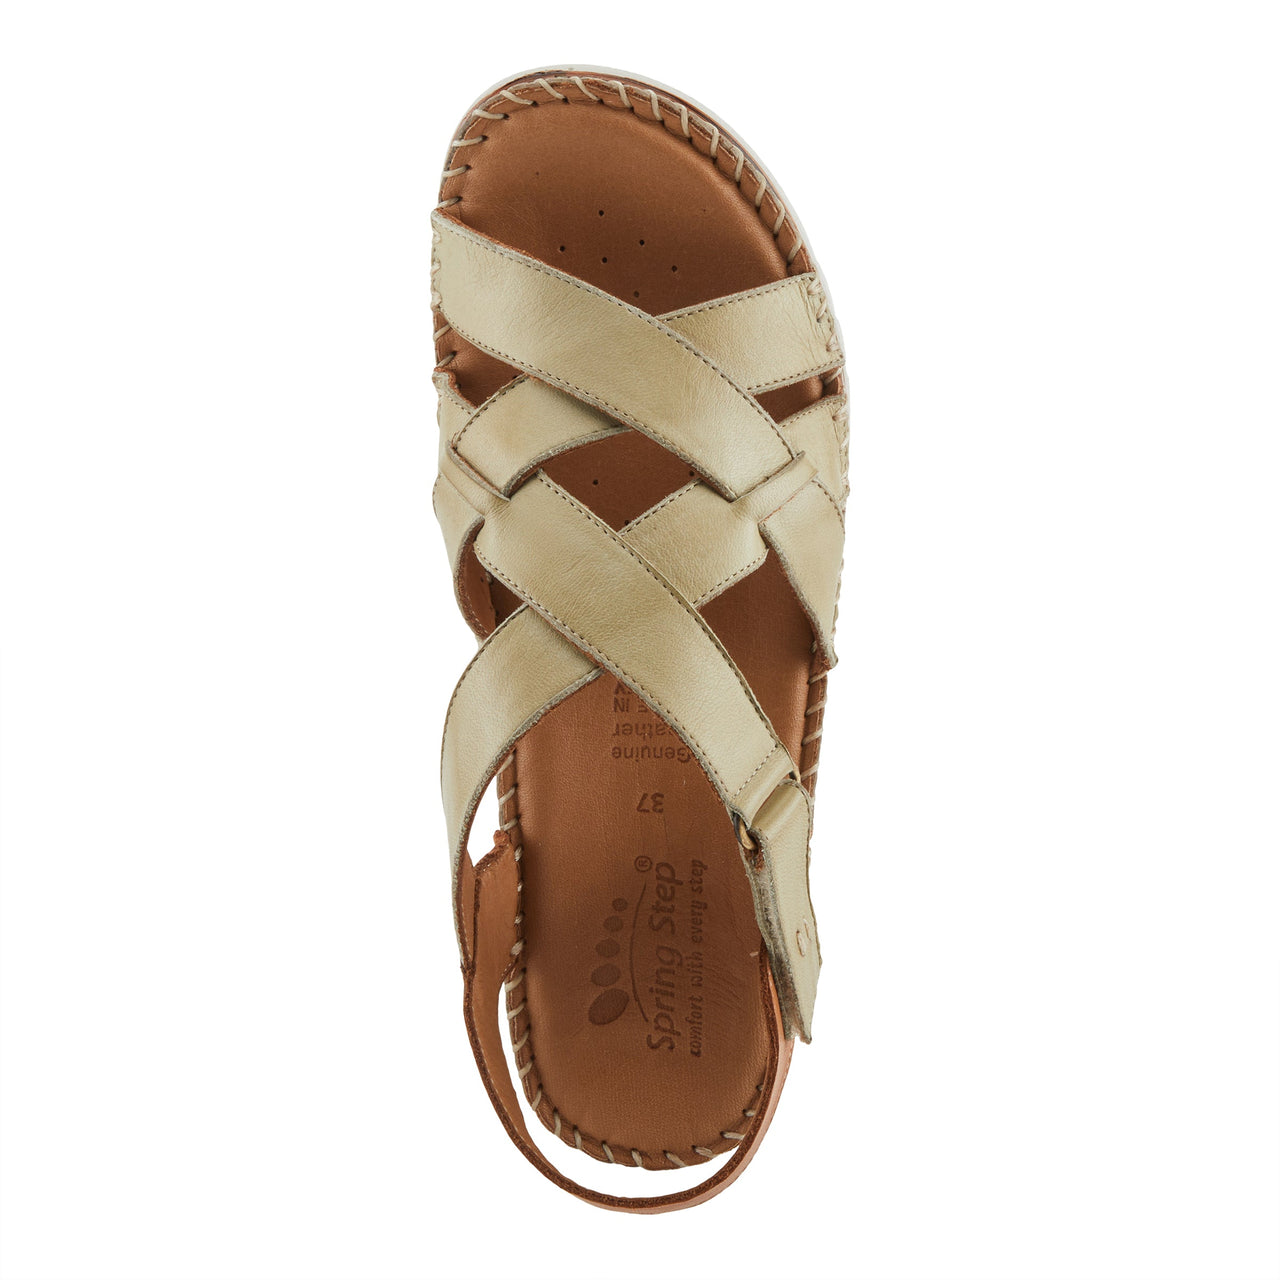 Classic Spring Step Migula Sandals featuring braided straps and cushioned heel cup